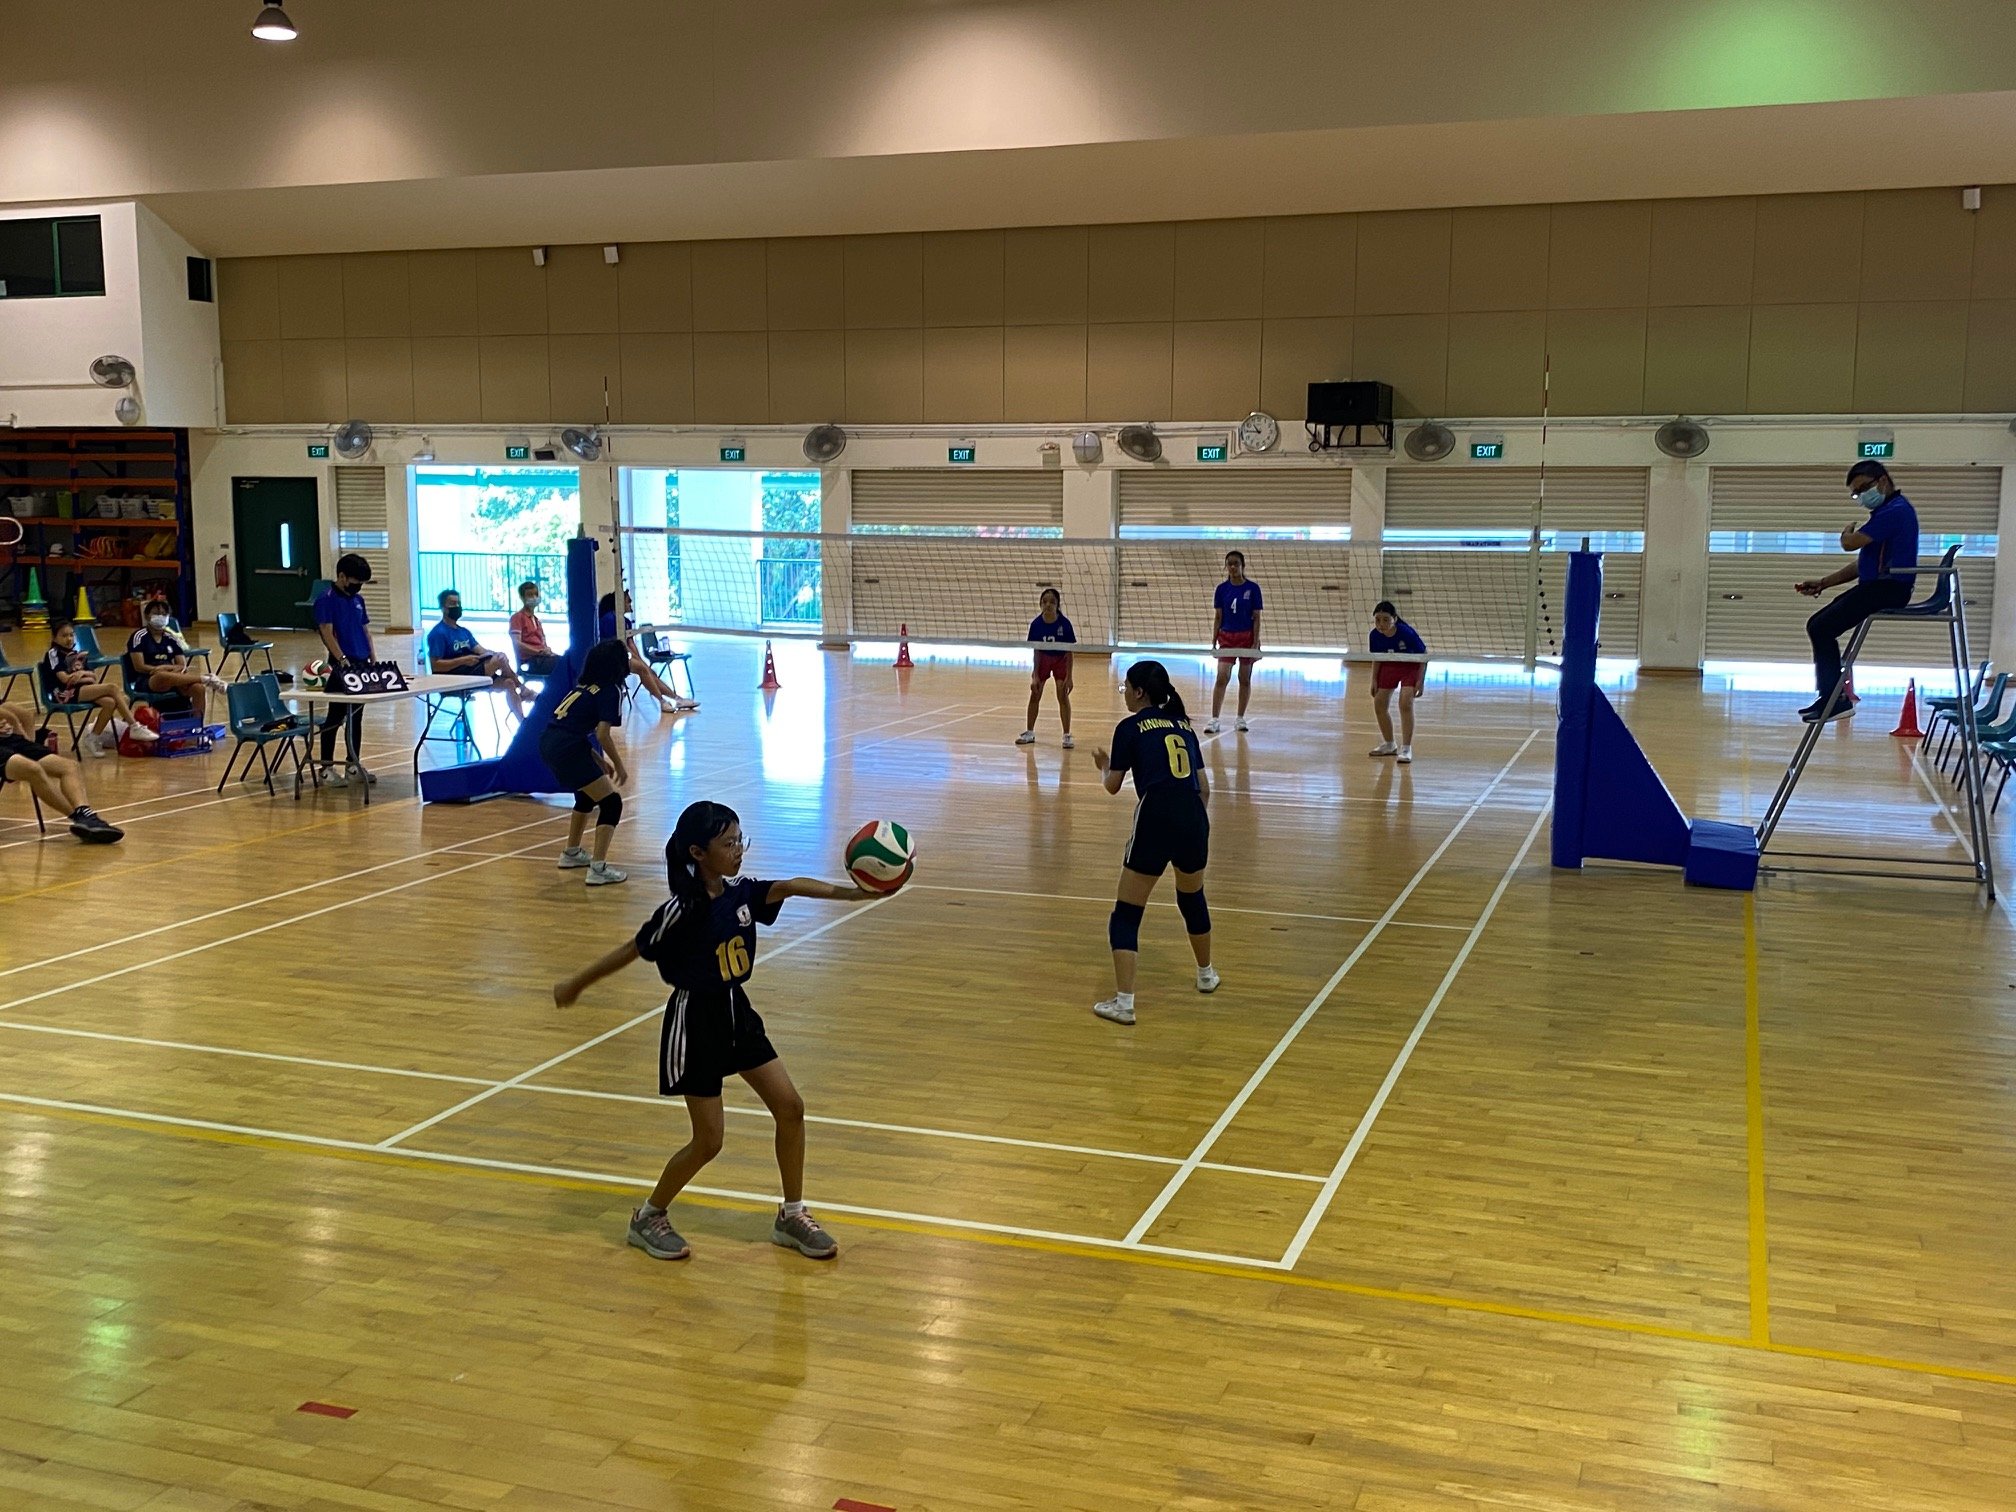 Yuhua Primary (blue) vs Xinmin Primary (black) at the National School Games Senior Division girls volleyball preliminary stage